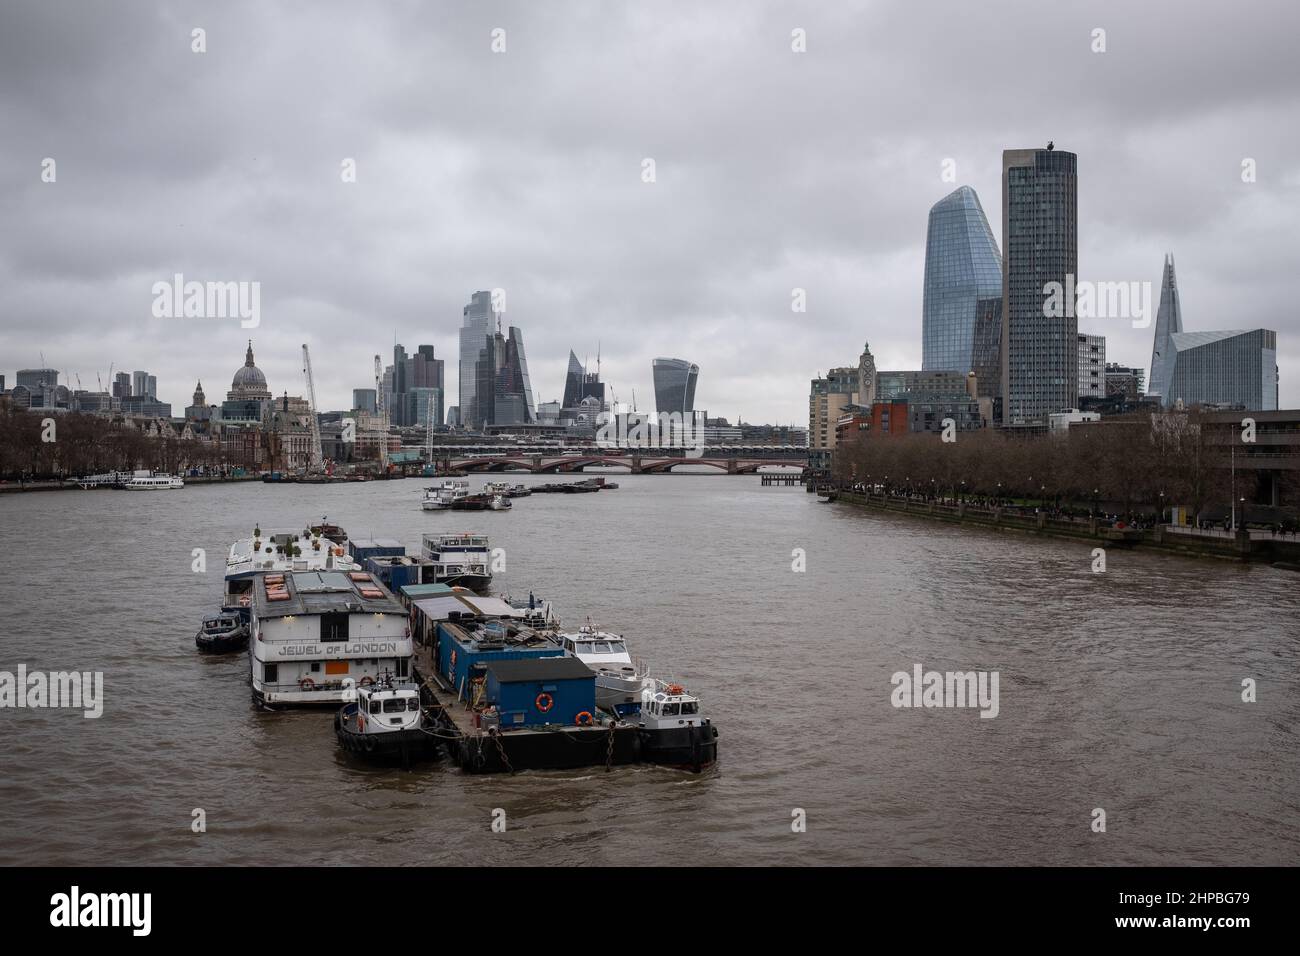 View from the Millennium Bridge toward the Square Mile. Taken on a dull overcast day in London. Stock Photo